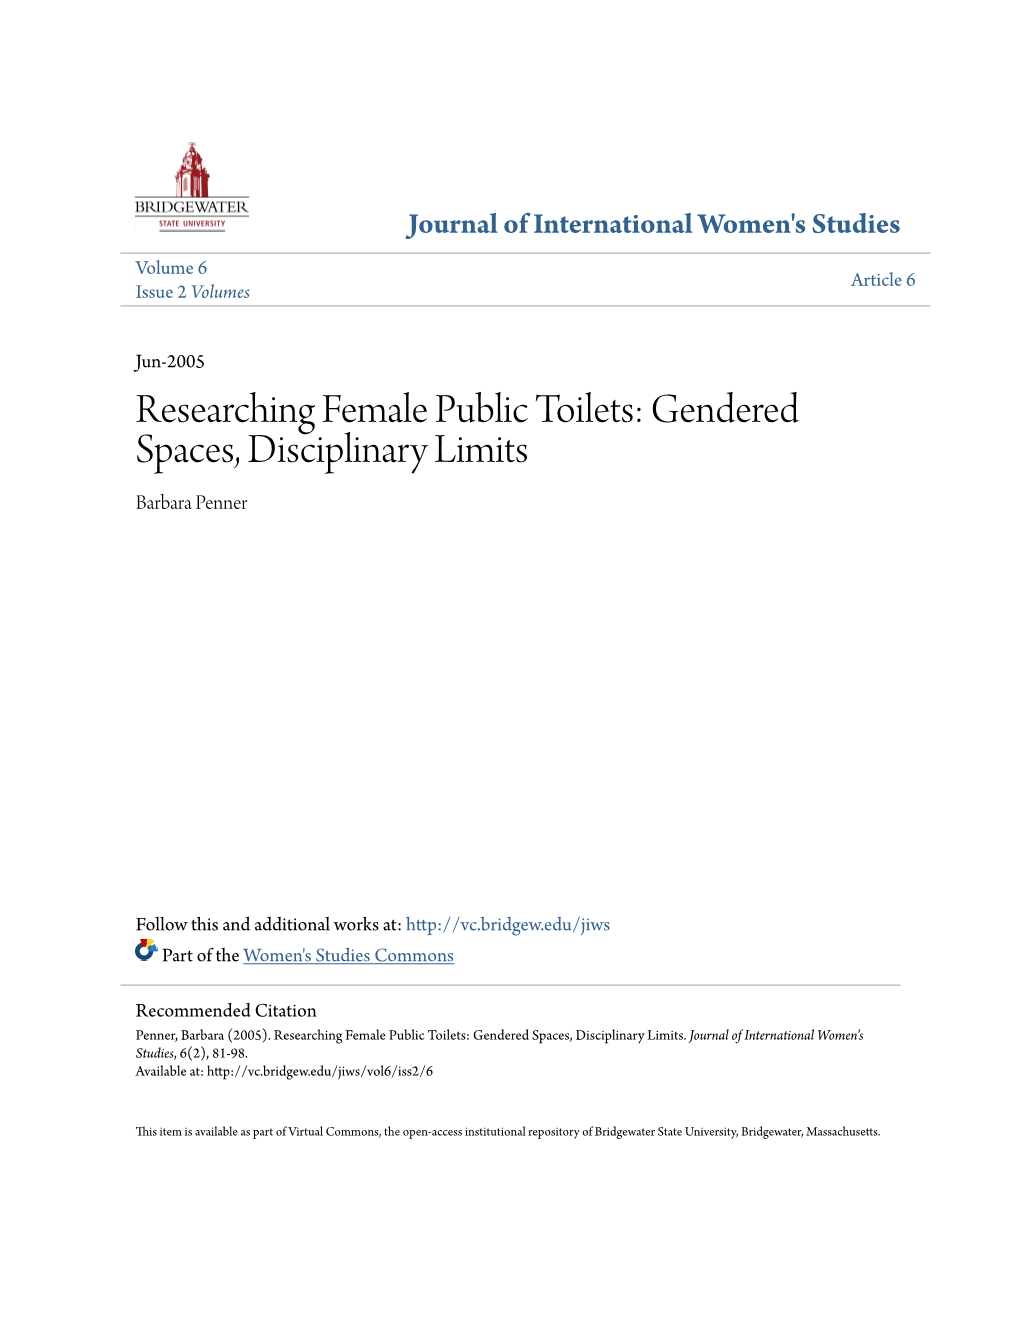 Researching Female Public Toilets: Gendered Spaces, Disciplinary Limits Barbara Penner